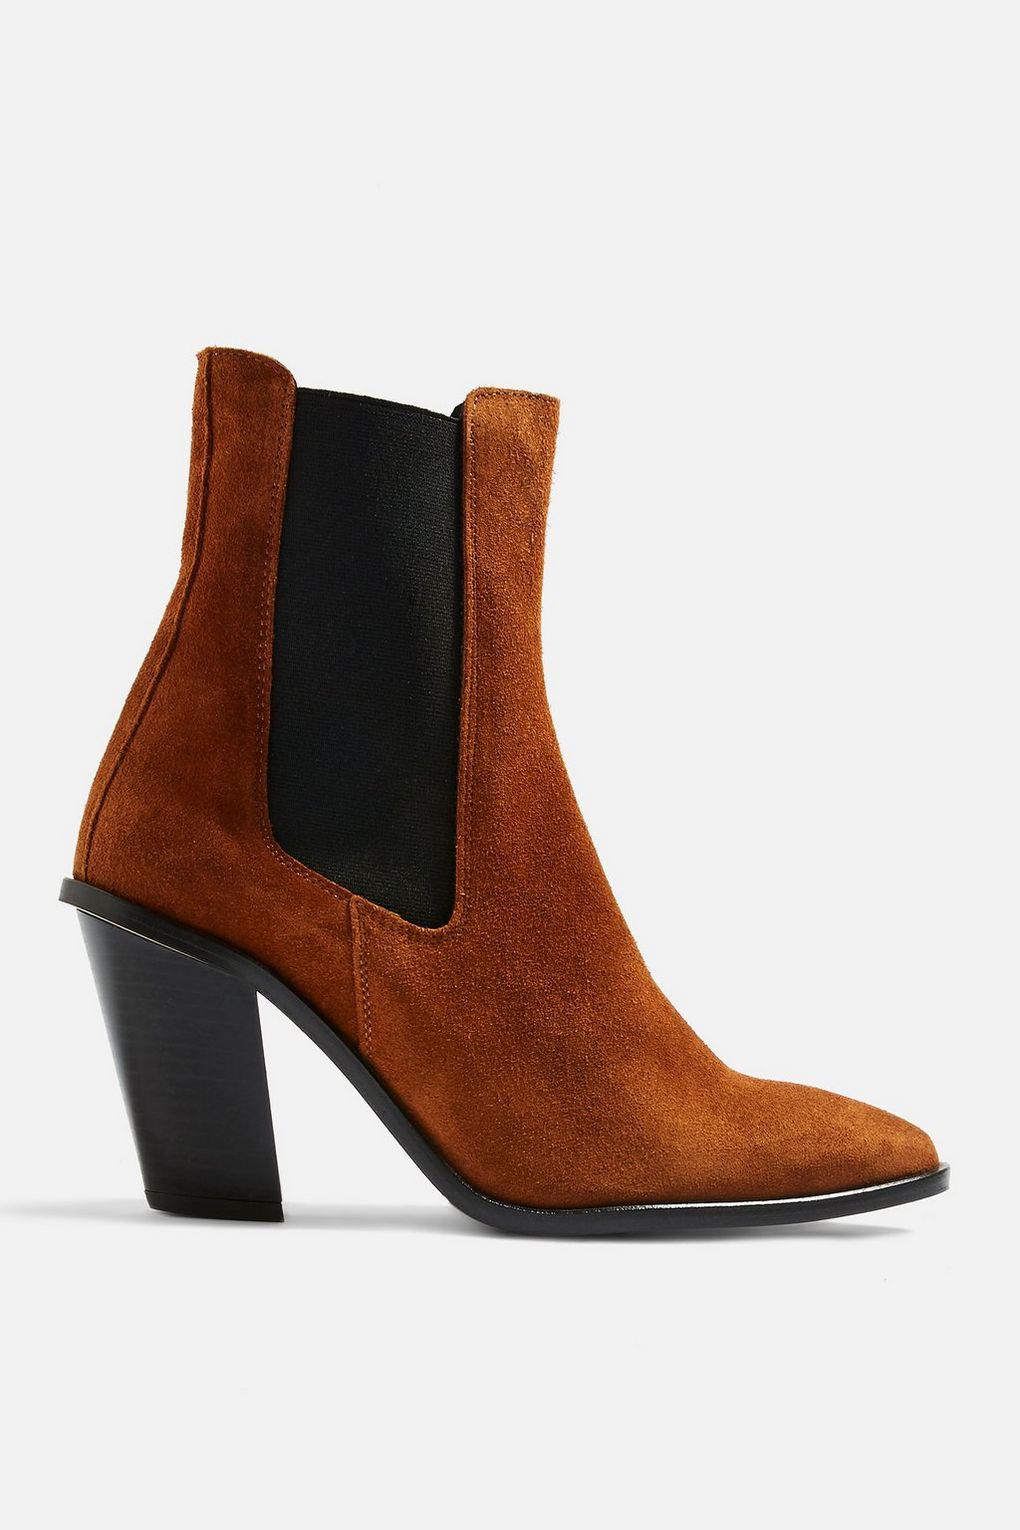 TOPSHOP Leather Morty Chelsea Bootie 